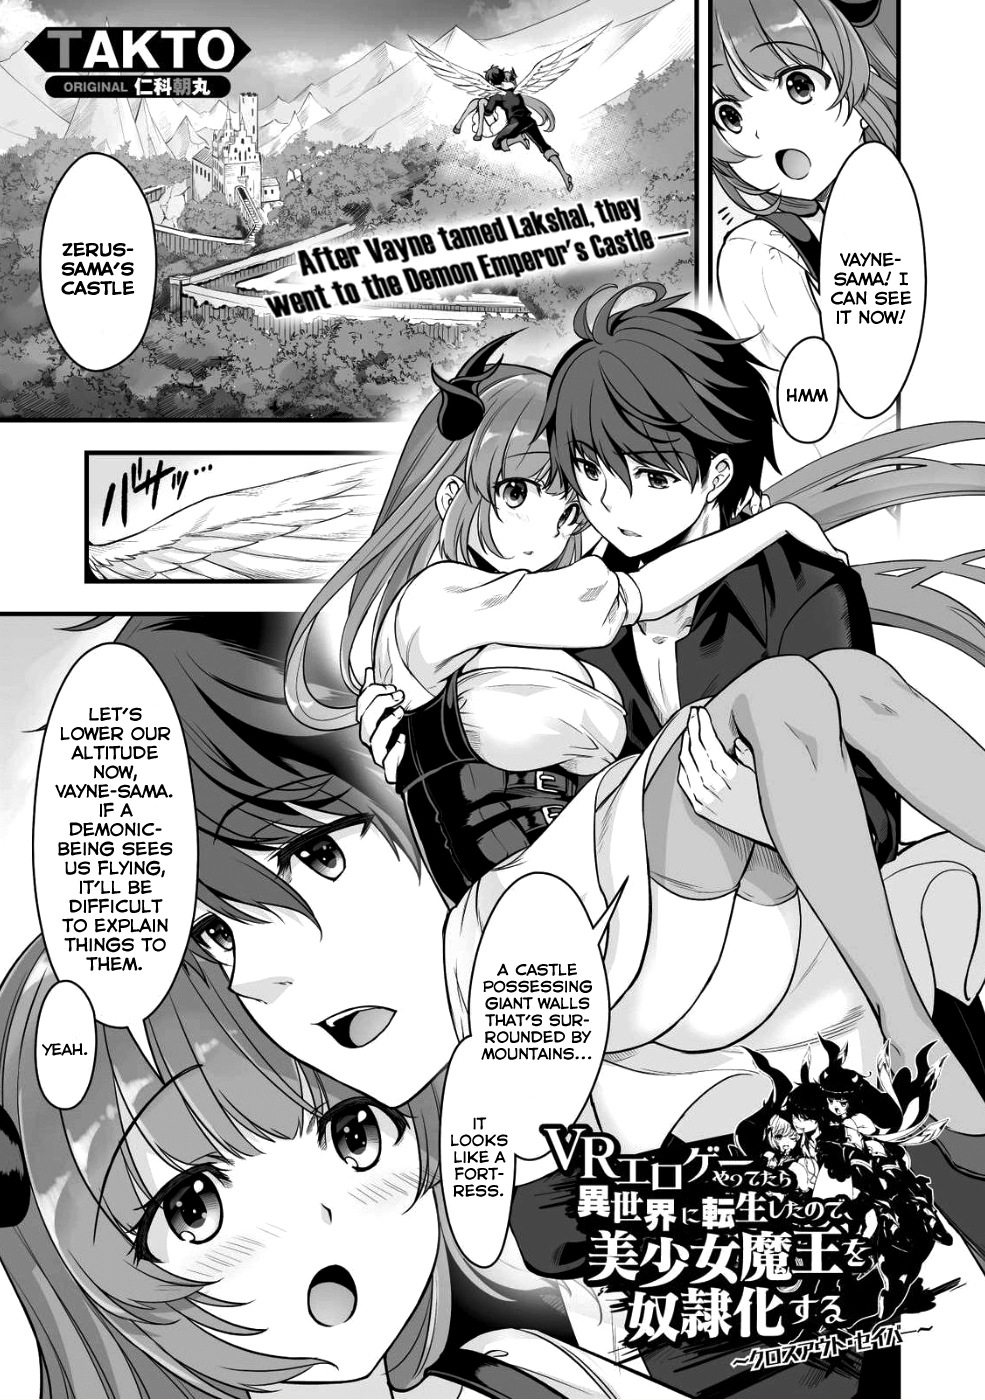 When I Was Playing Eroge With Vr, I Was Reincarnated In A Different World, I Will Enslave All The Beautiful Demon Girls ~Crossout Saber~ - Page 1